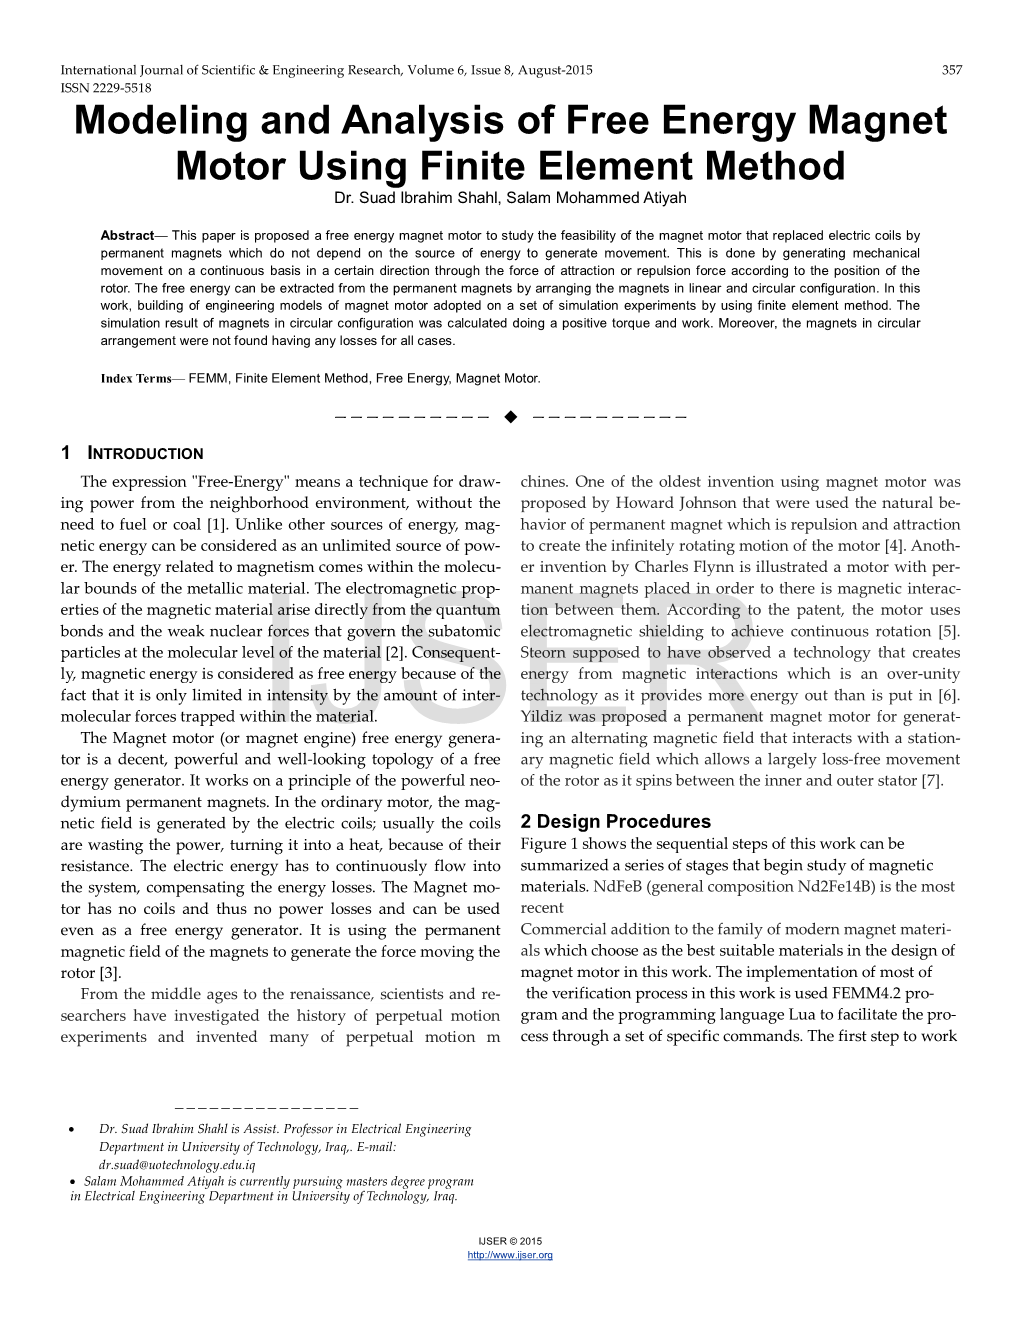 Modeling and Analysis of Free Energy Magnet Motor Using Finite Element Method Dr